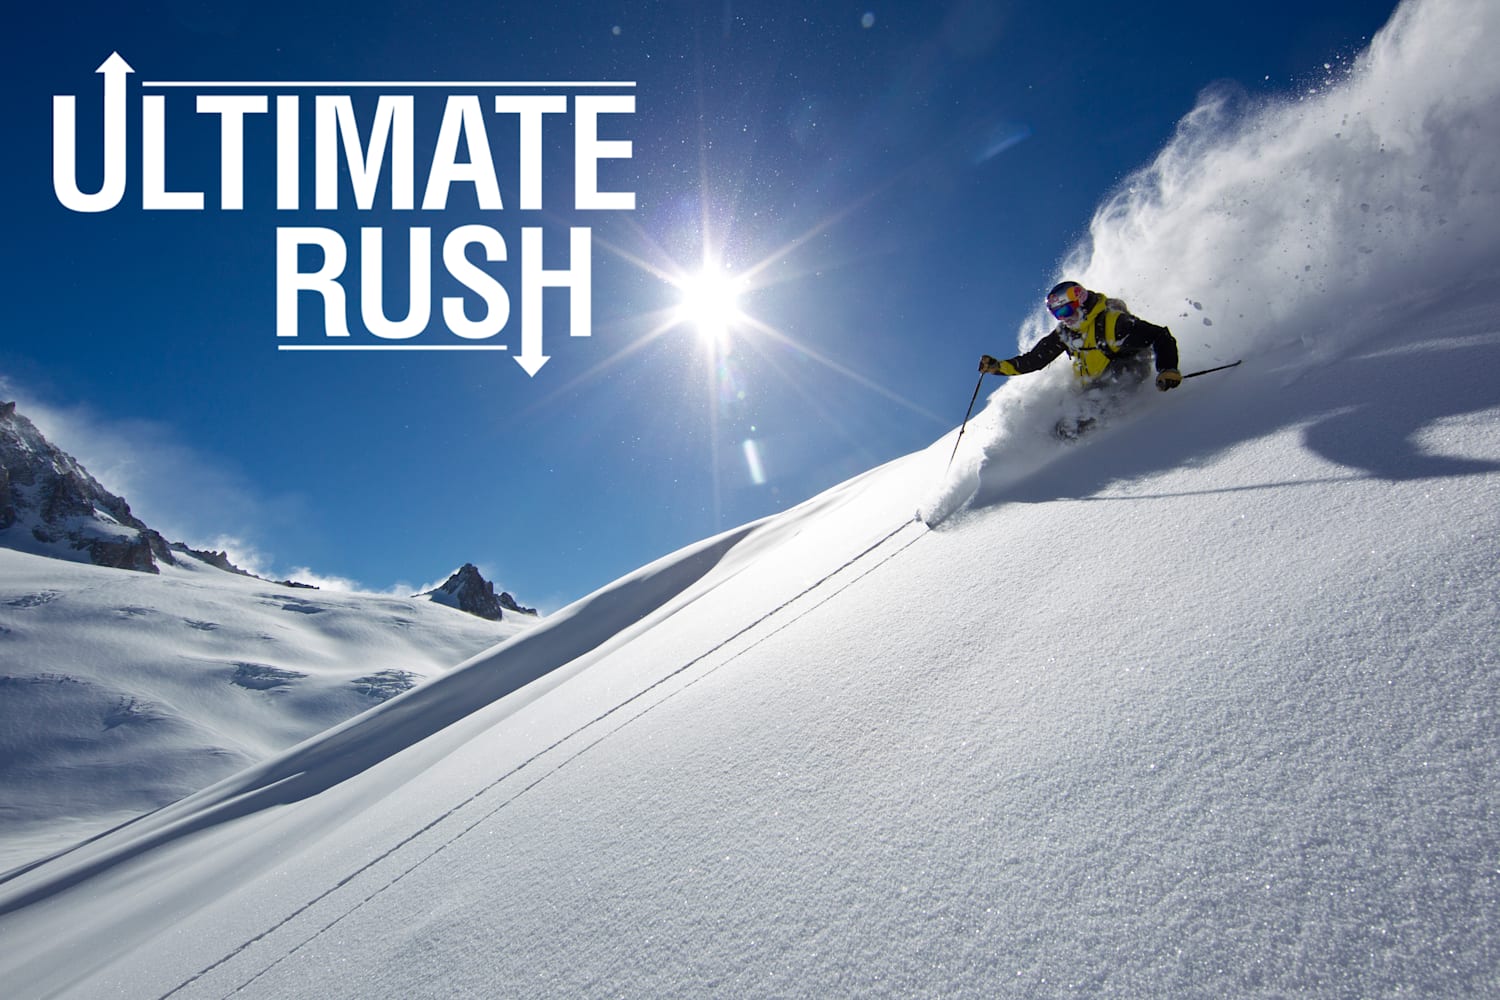 Ultimate Rush: Action sports at their absolute peak